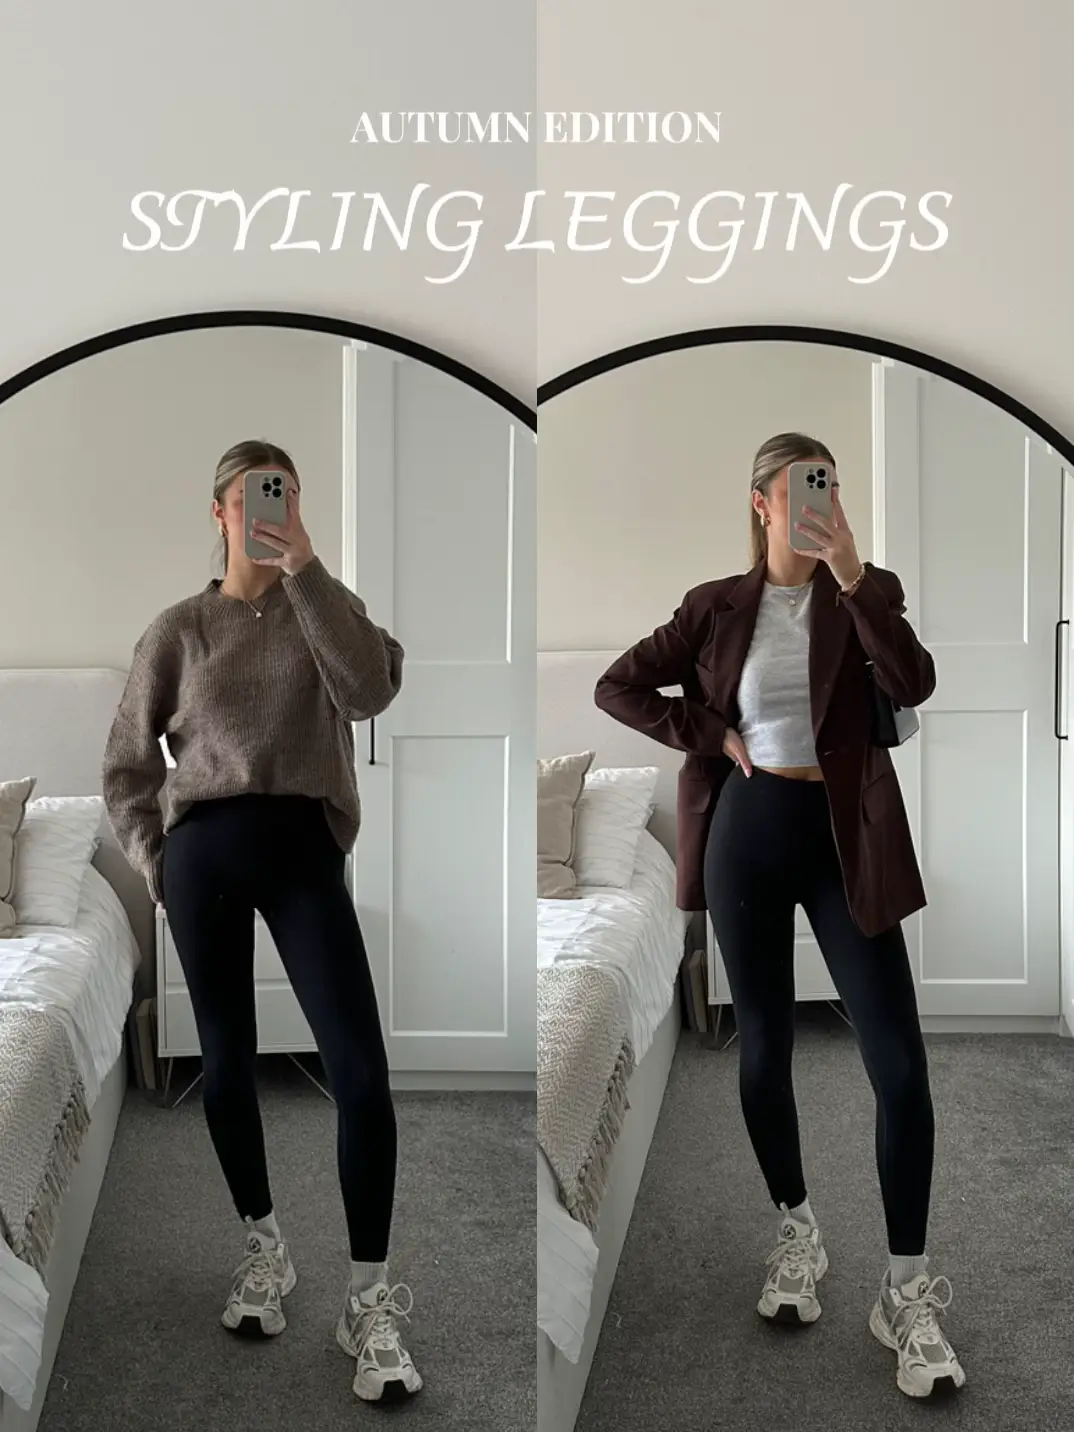 Styling leggings for autumn🍂  Gallery posted by Louisesibley